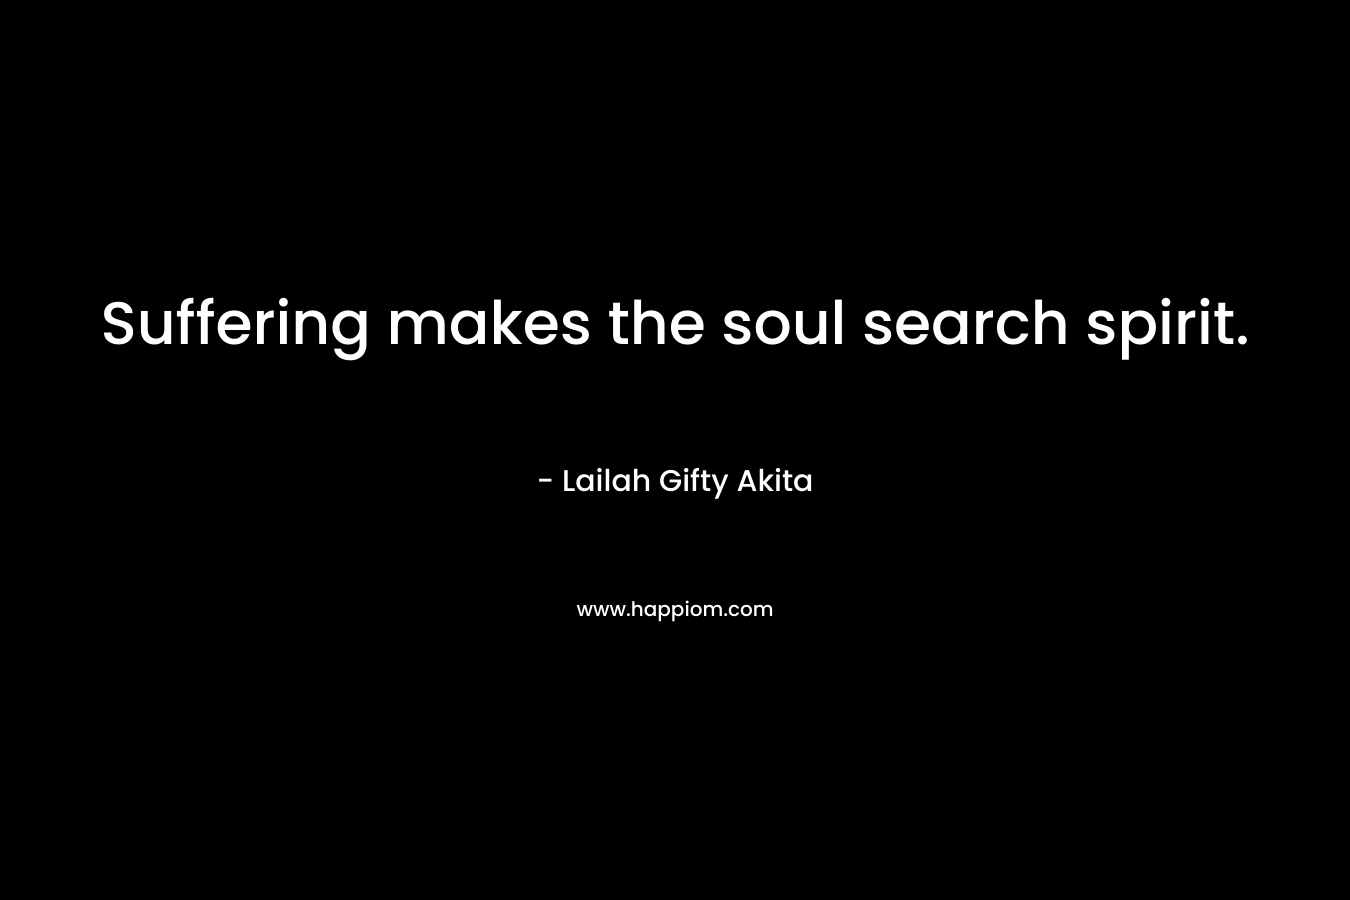 Suffering makes the soul search spirit.